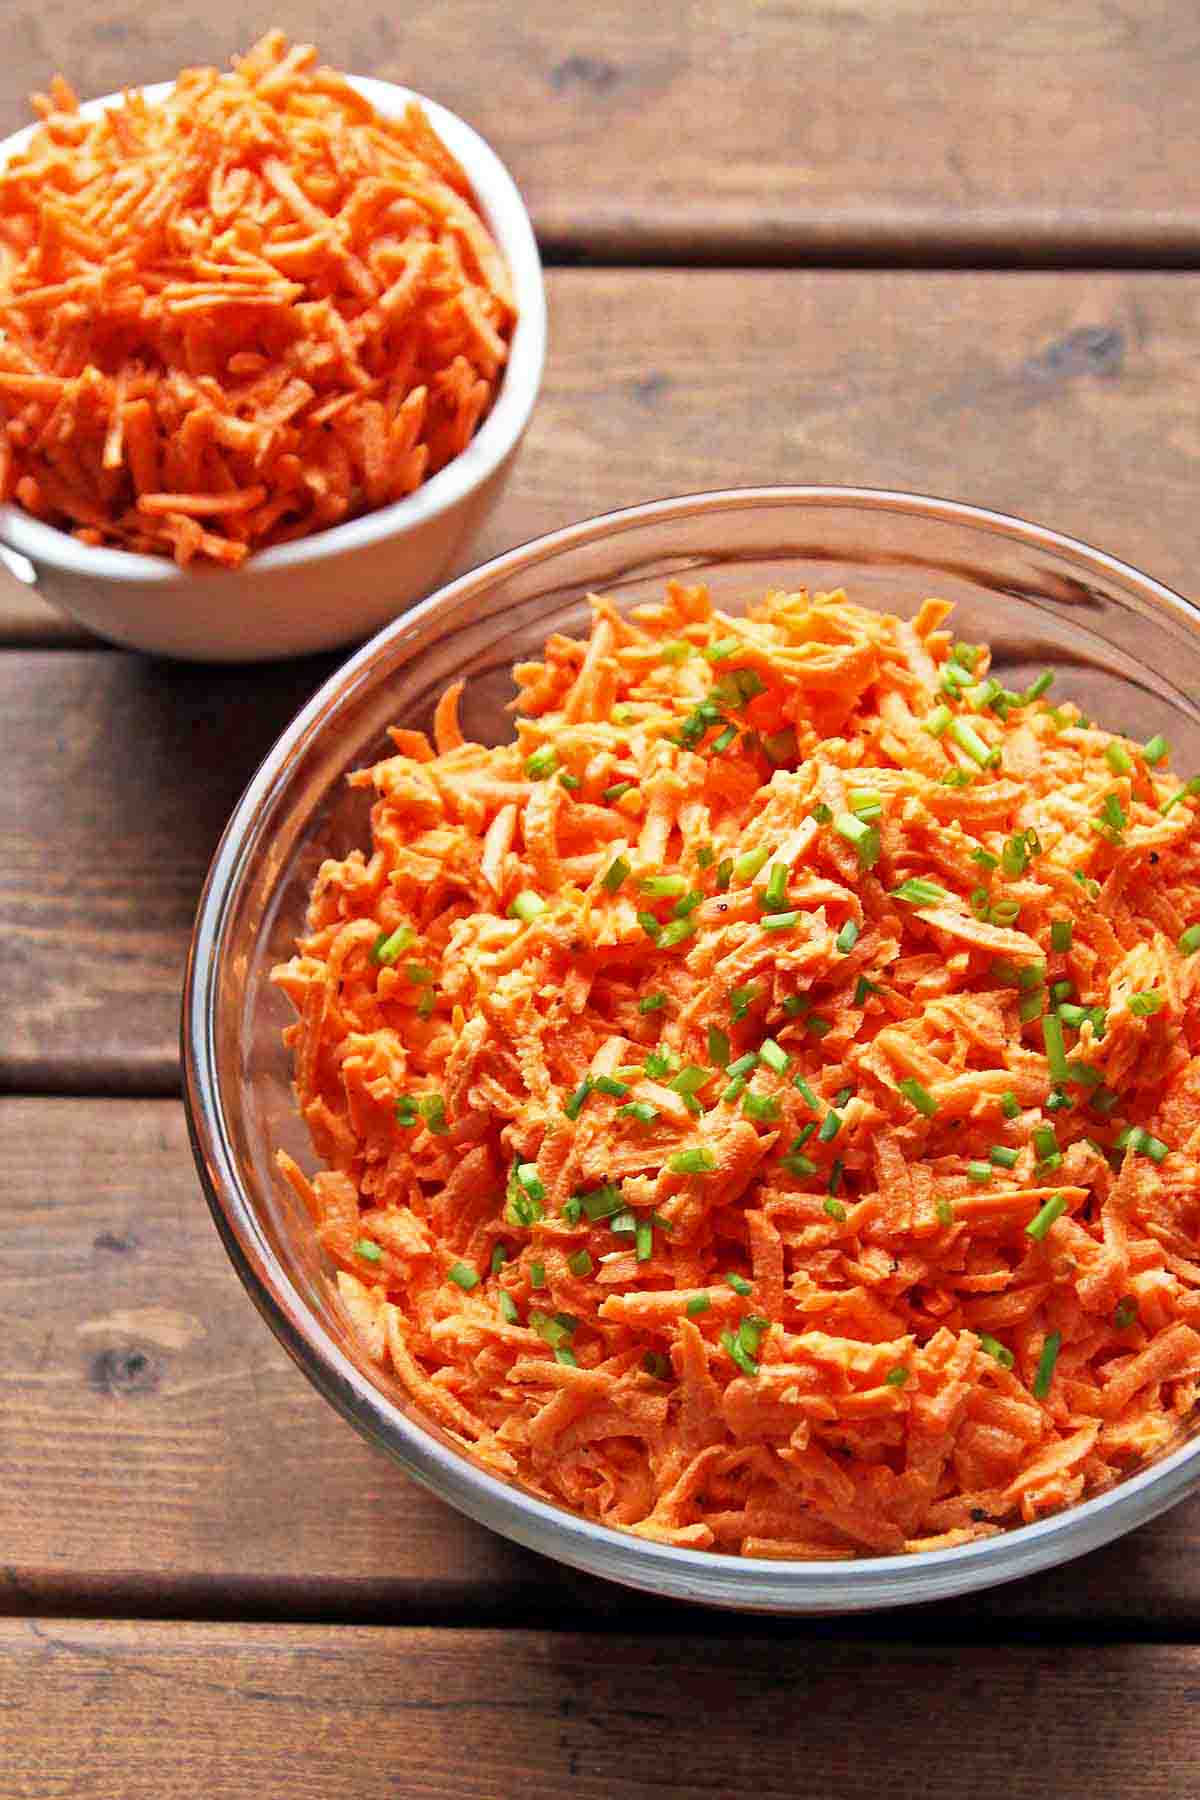 shredded carrot salad in large glass bowl and small white individual bowl